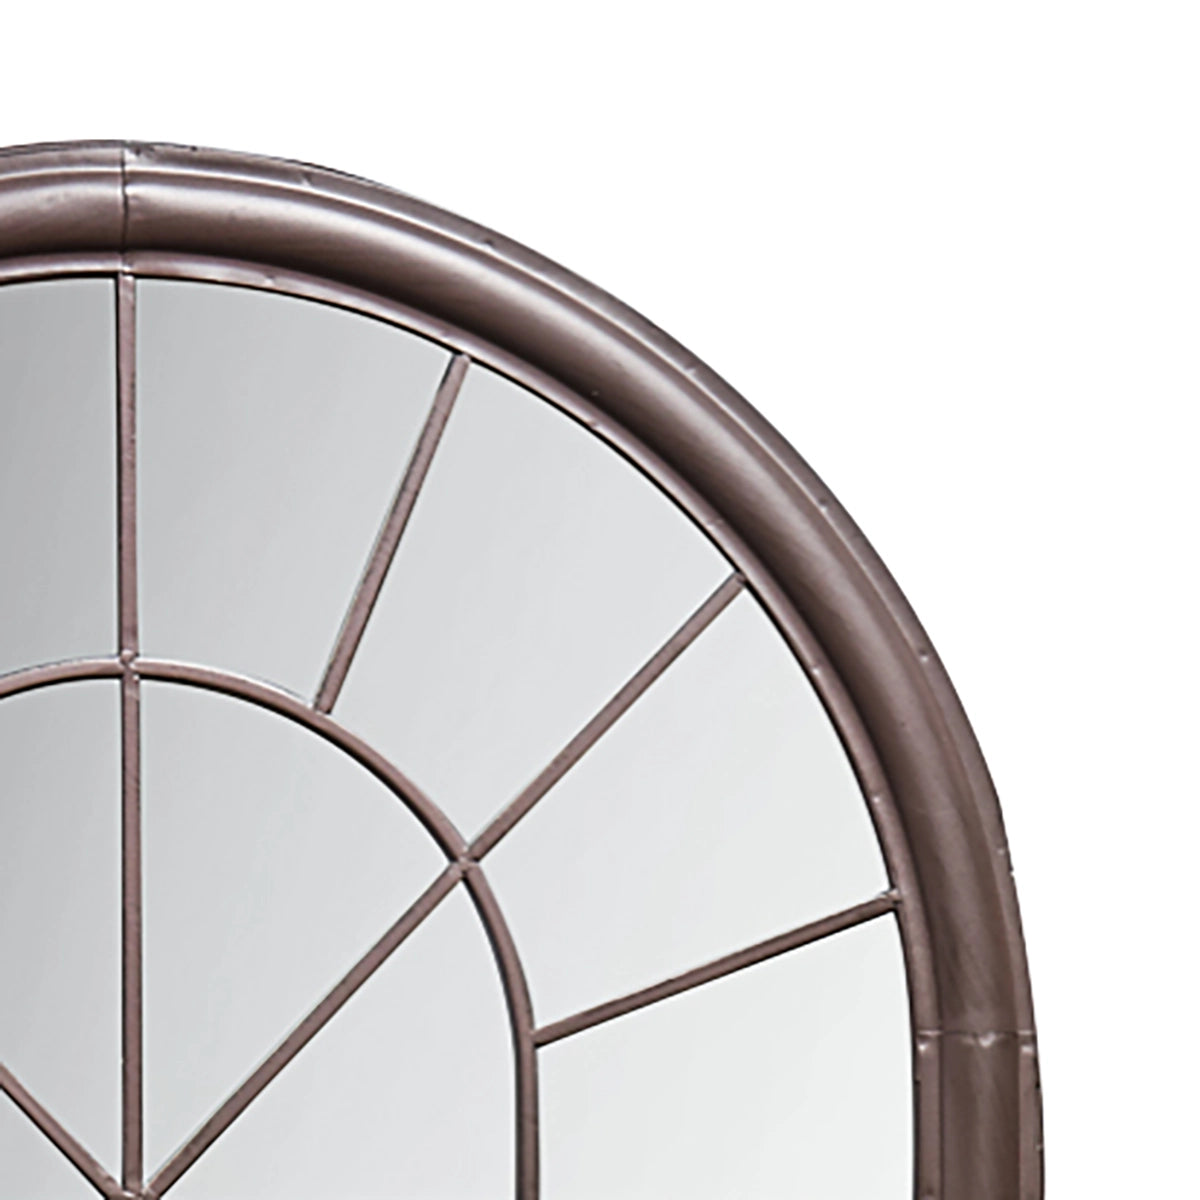 Wentworth Large Rustic Brown Arch Garden Window Mirror 131x75x4cm– Click Style